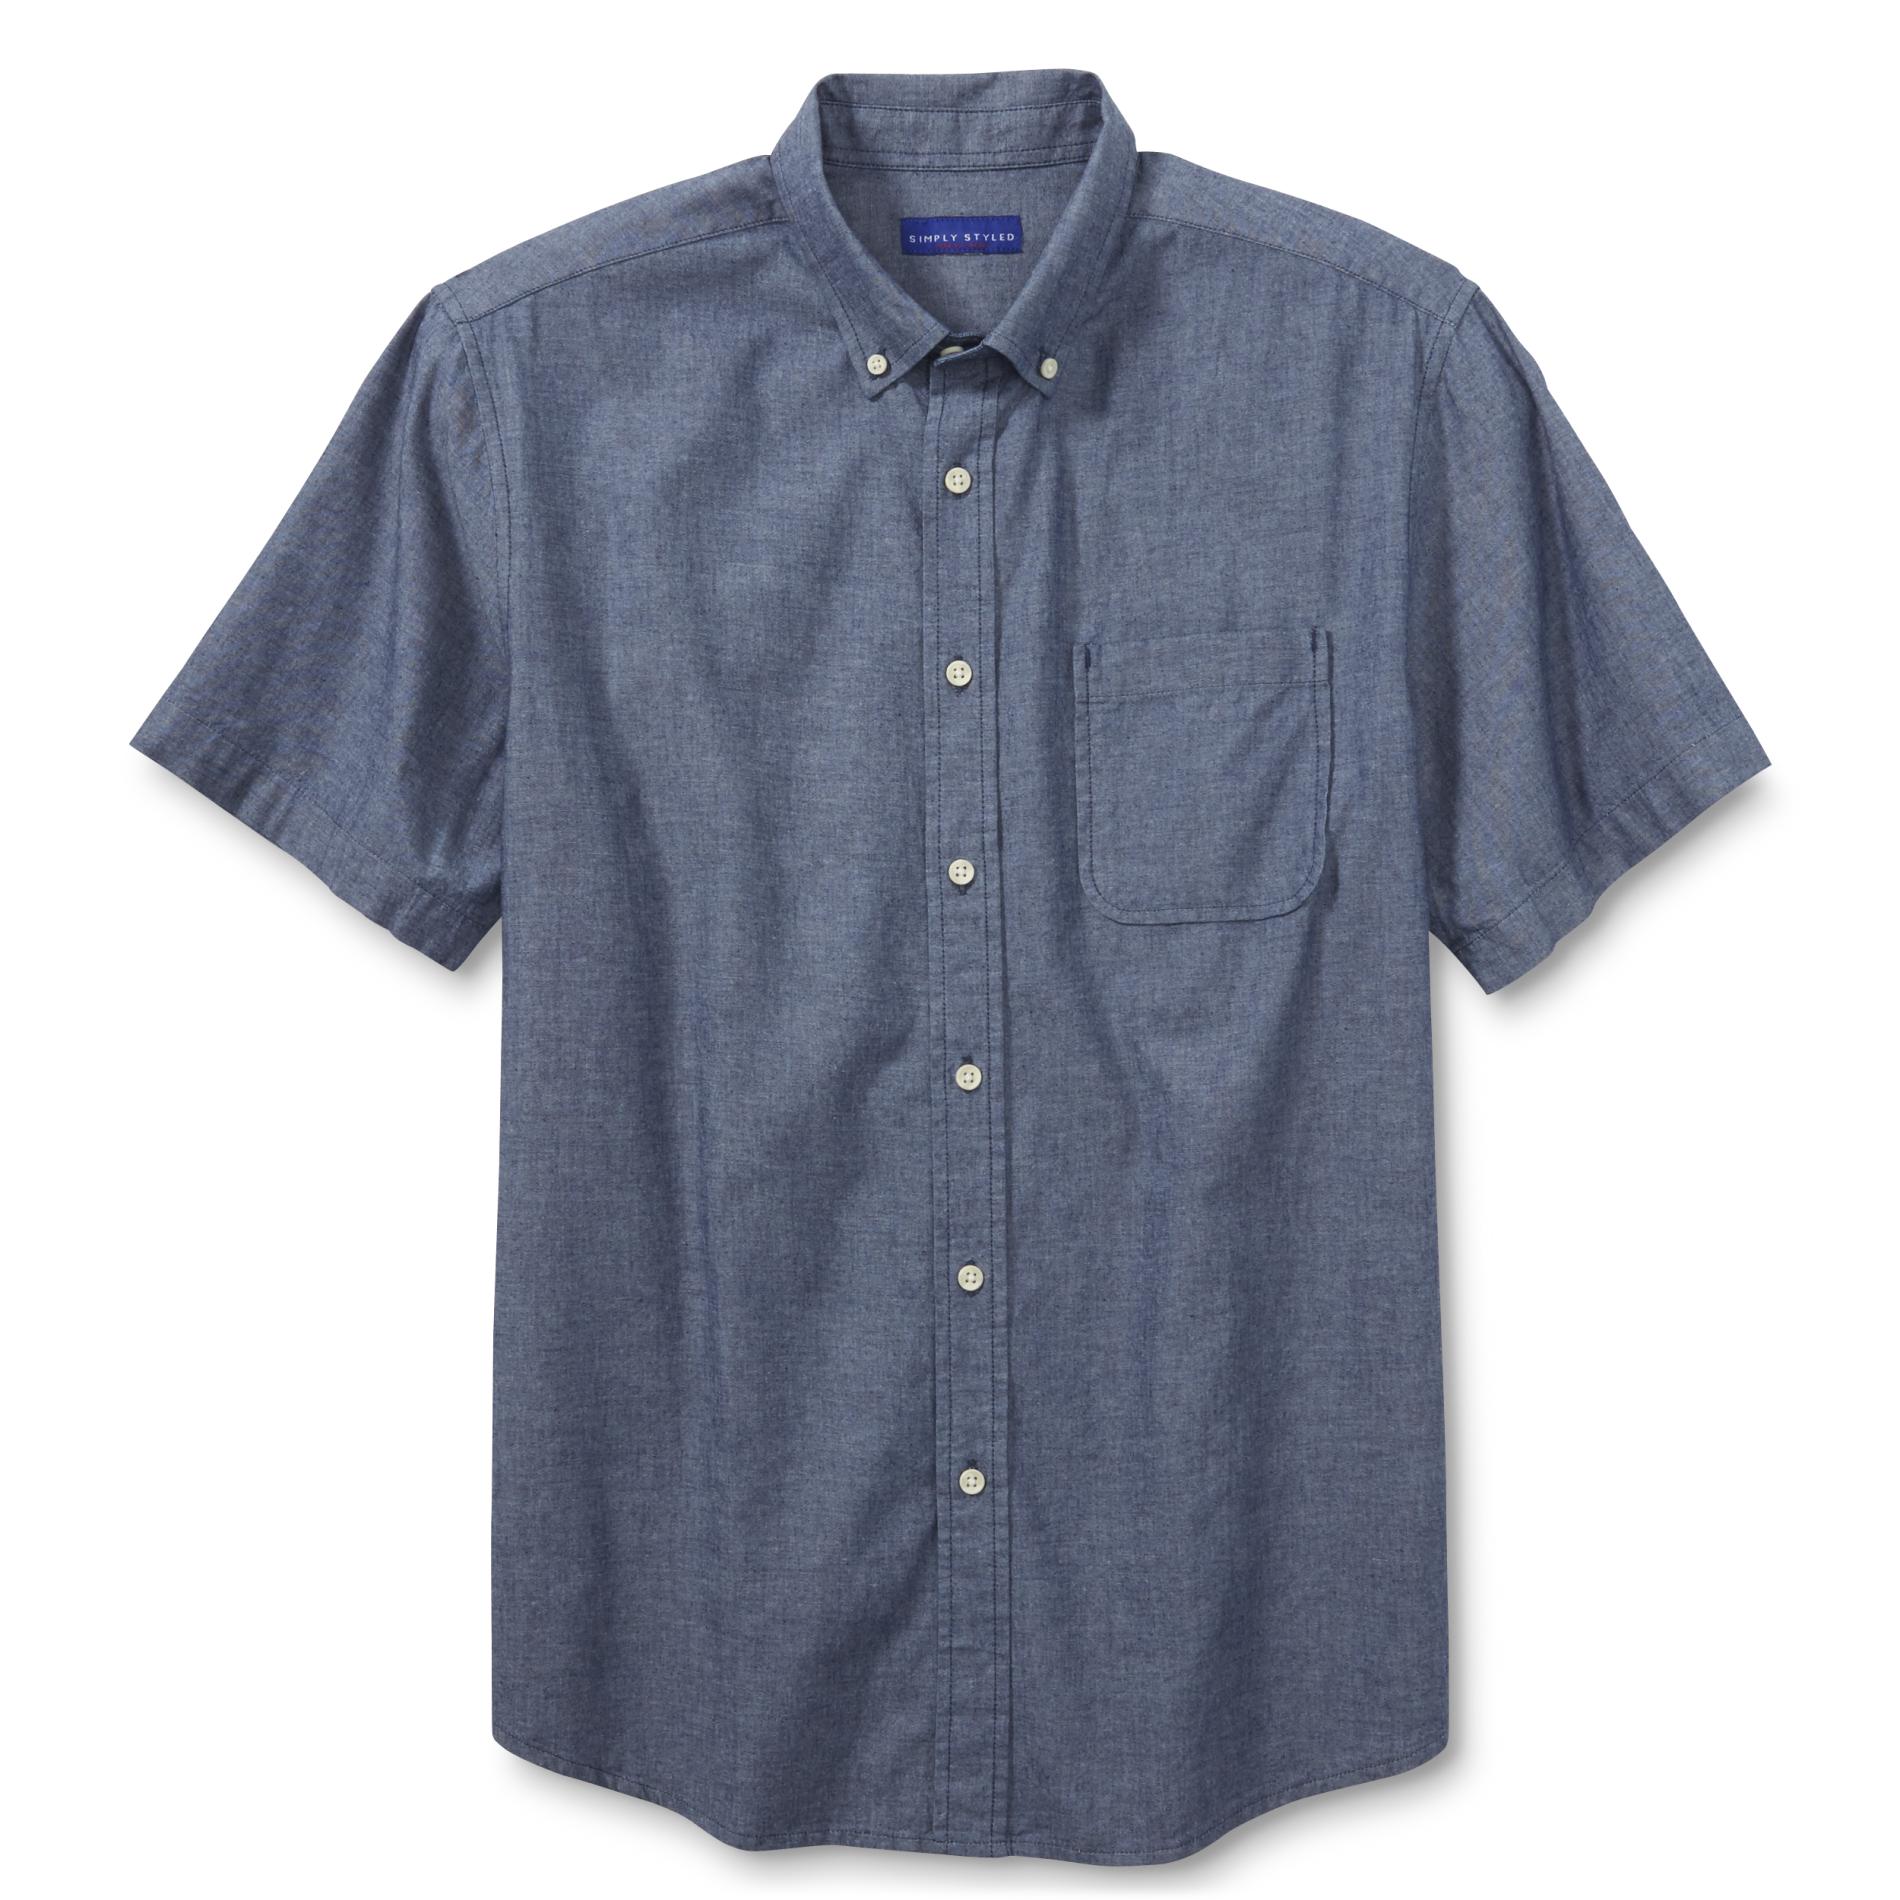 Simply Styled Men's Chambray Shirt